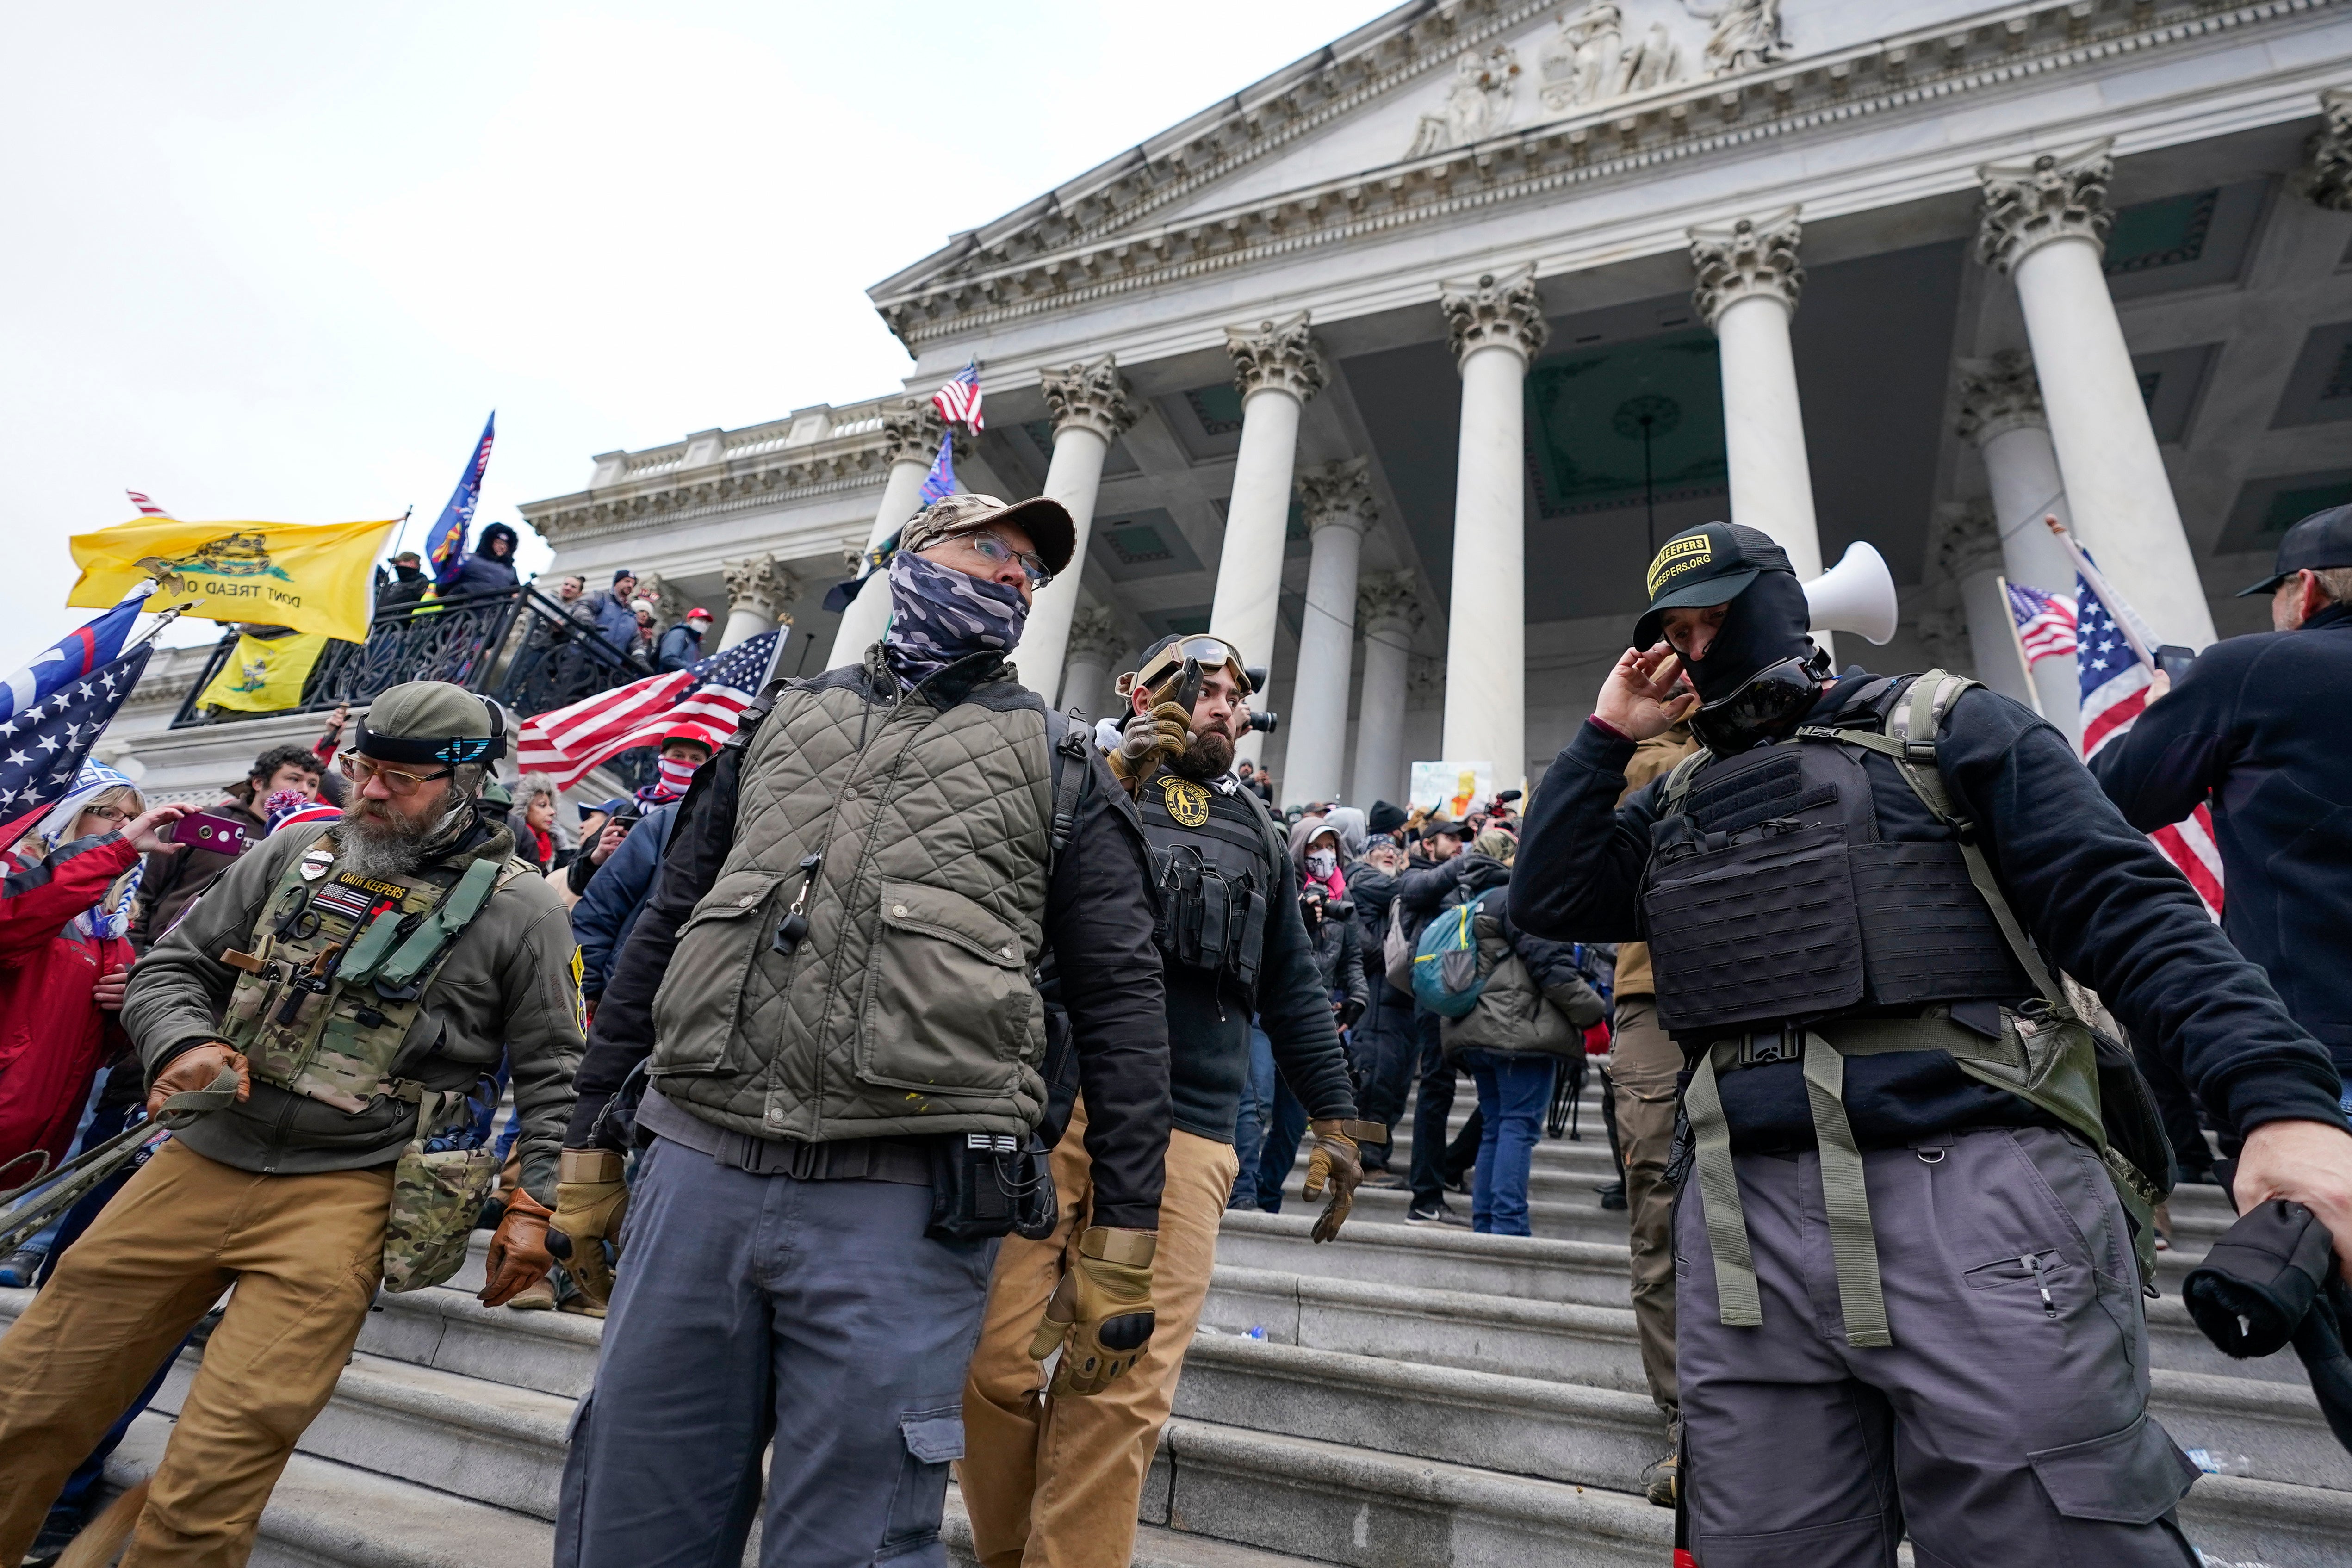 File. Members of the Oath Keepers extremist group stand on the East Front of the US Capitol on 6 January 2021 in Washington